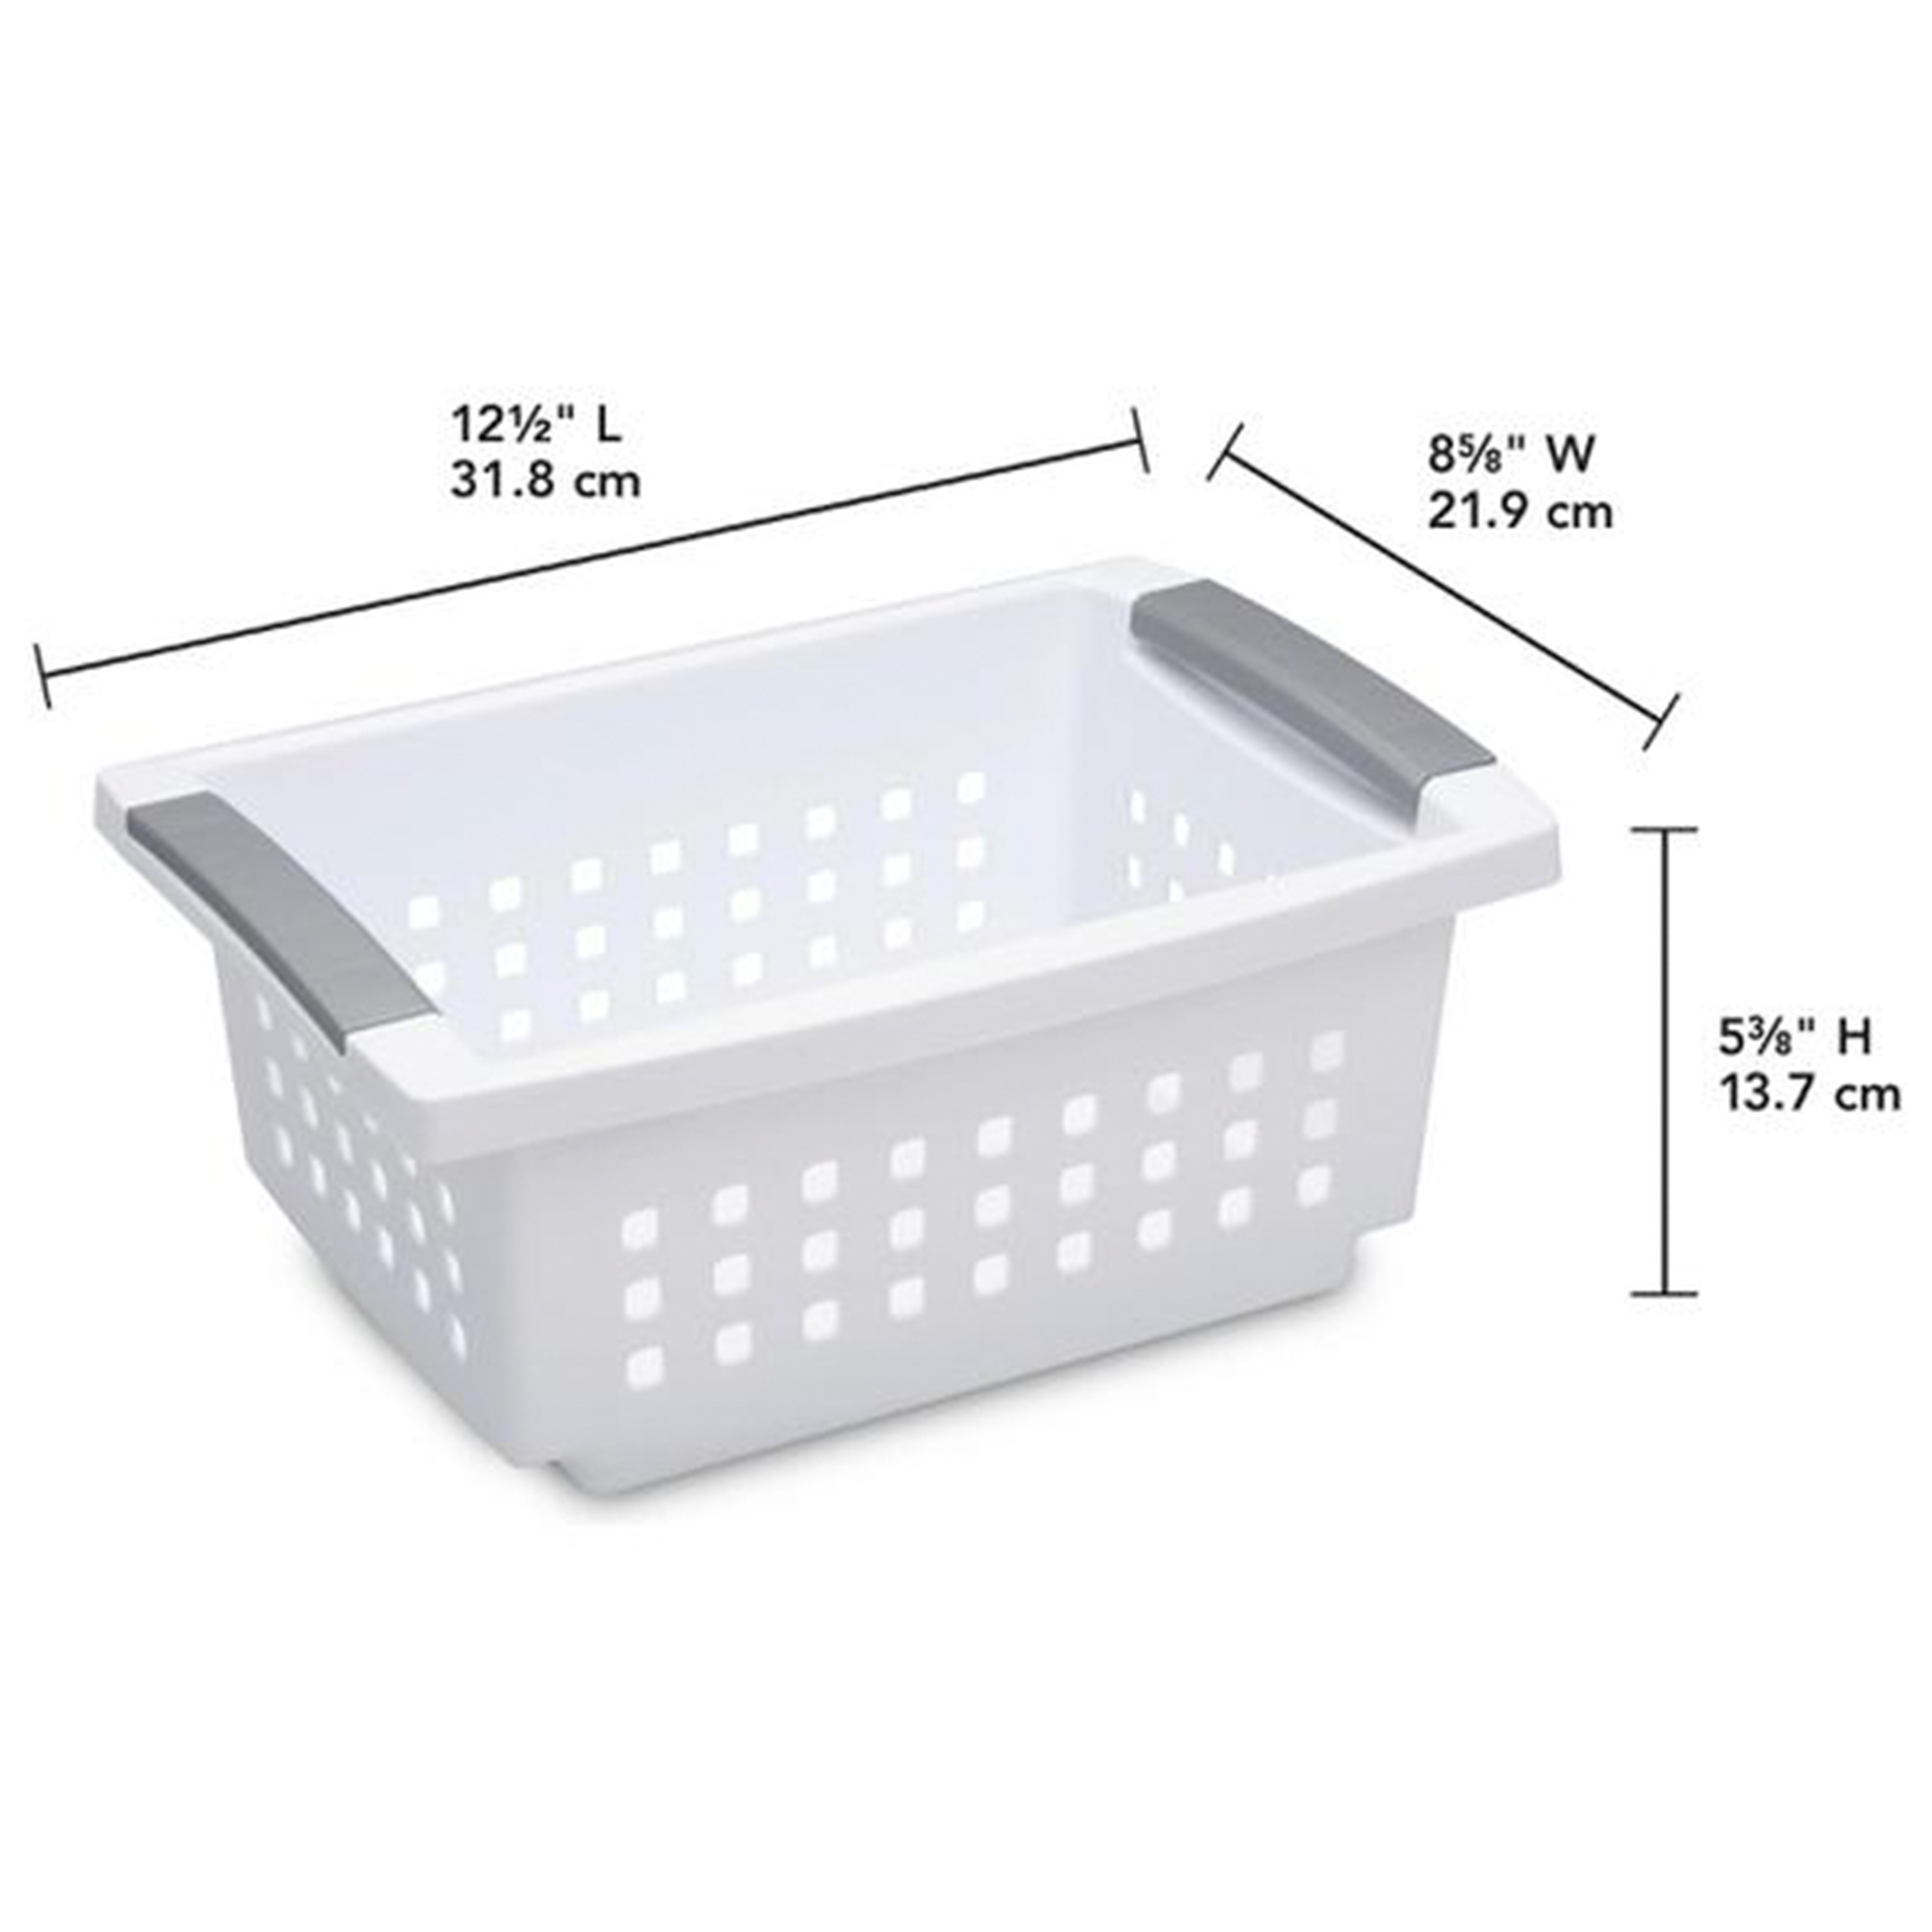 Sterilite Small Stacking Storage Basket with Comfort Grip Handles, 8 Pack - image 3 of 11